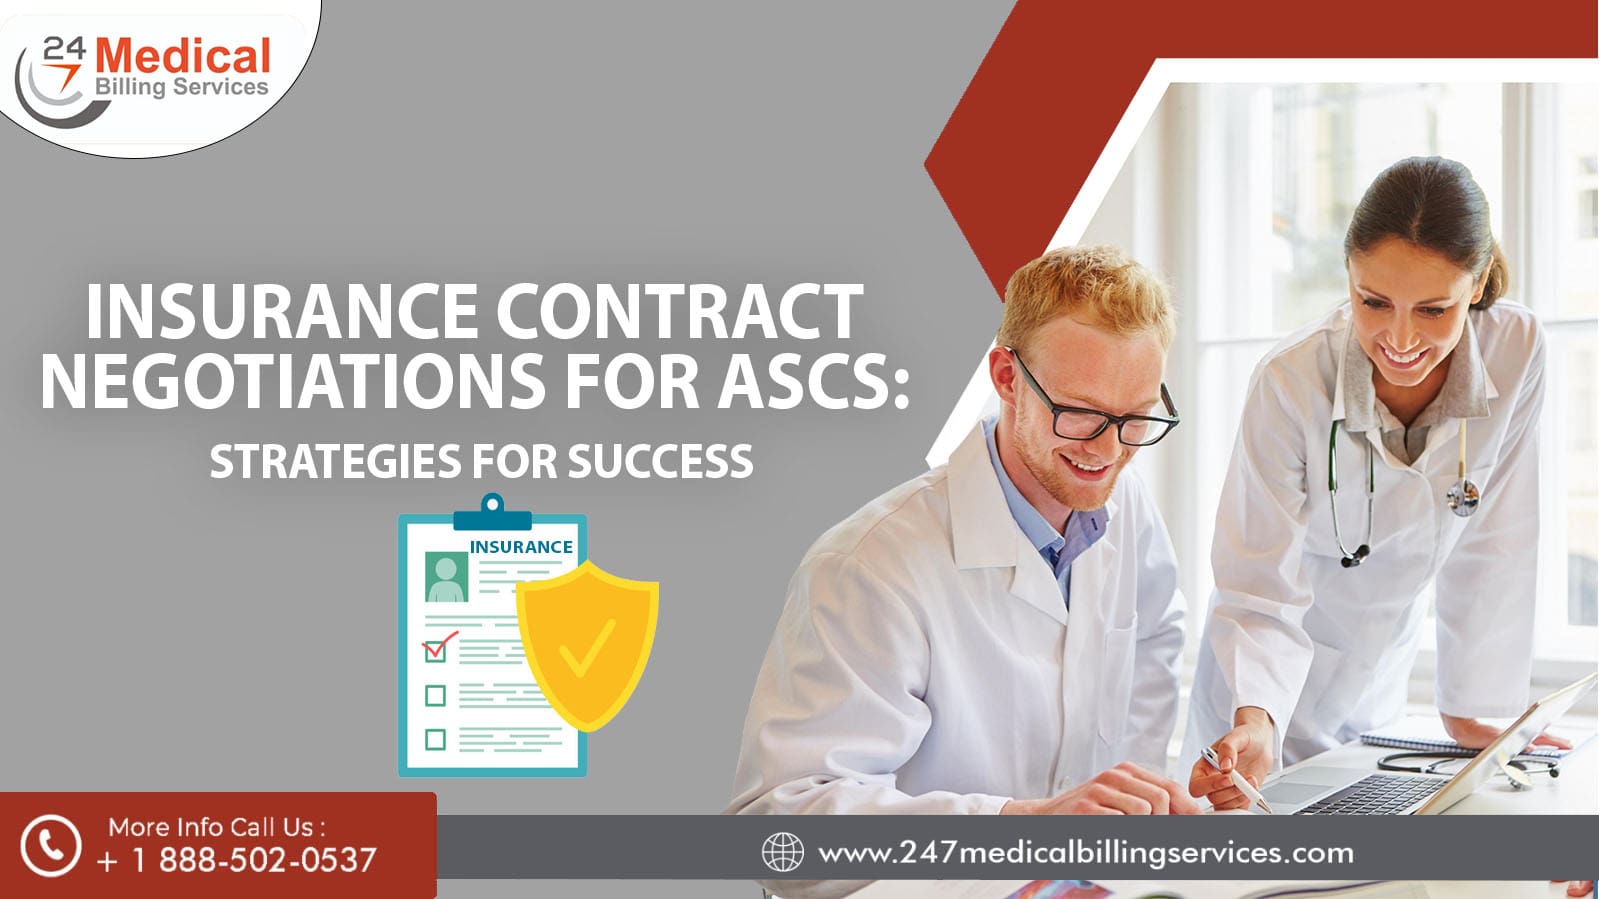  Insurance Contract Negotiations for ASCs: Strategies for Success